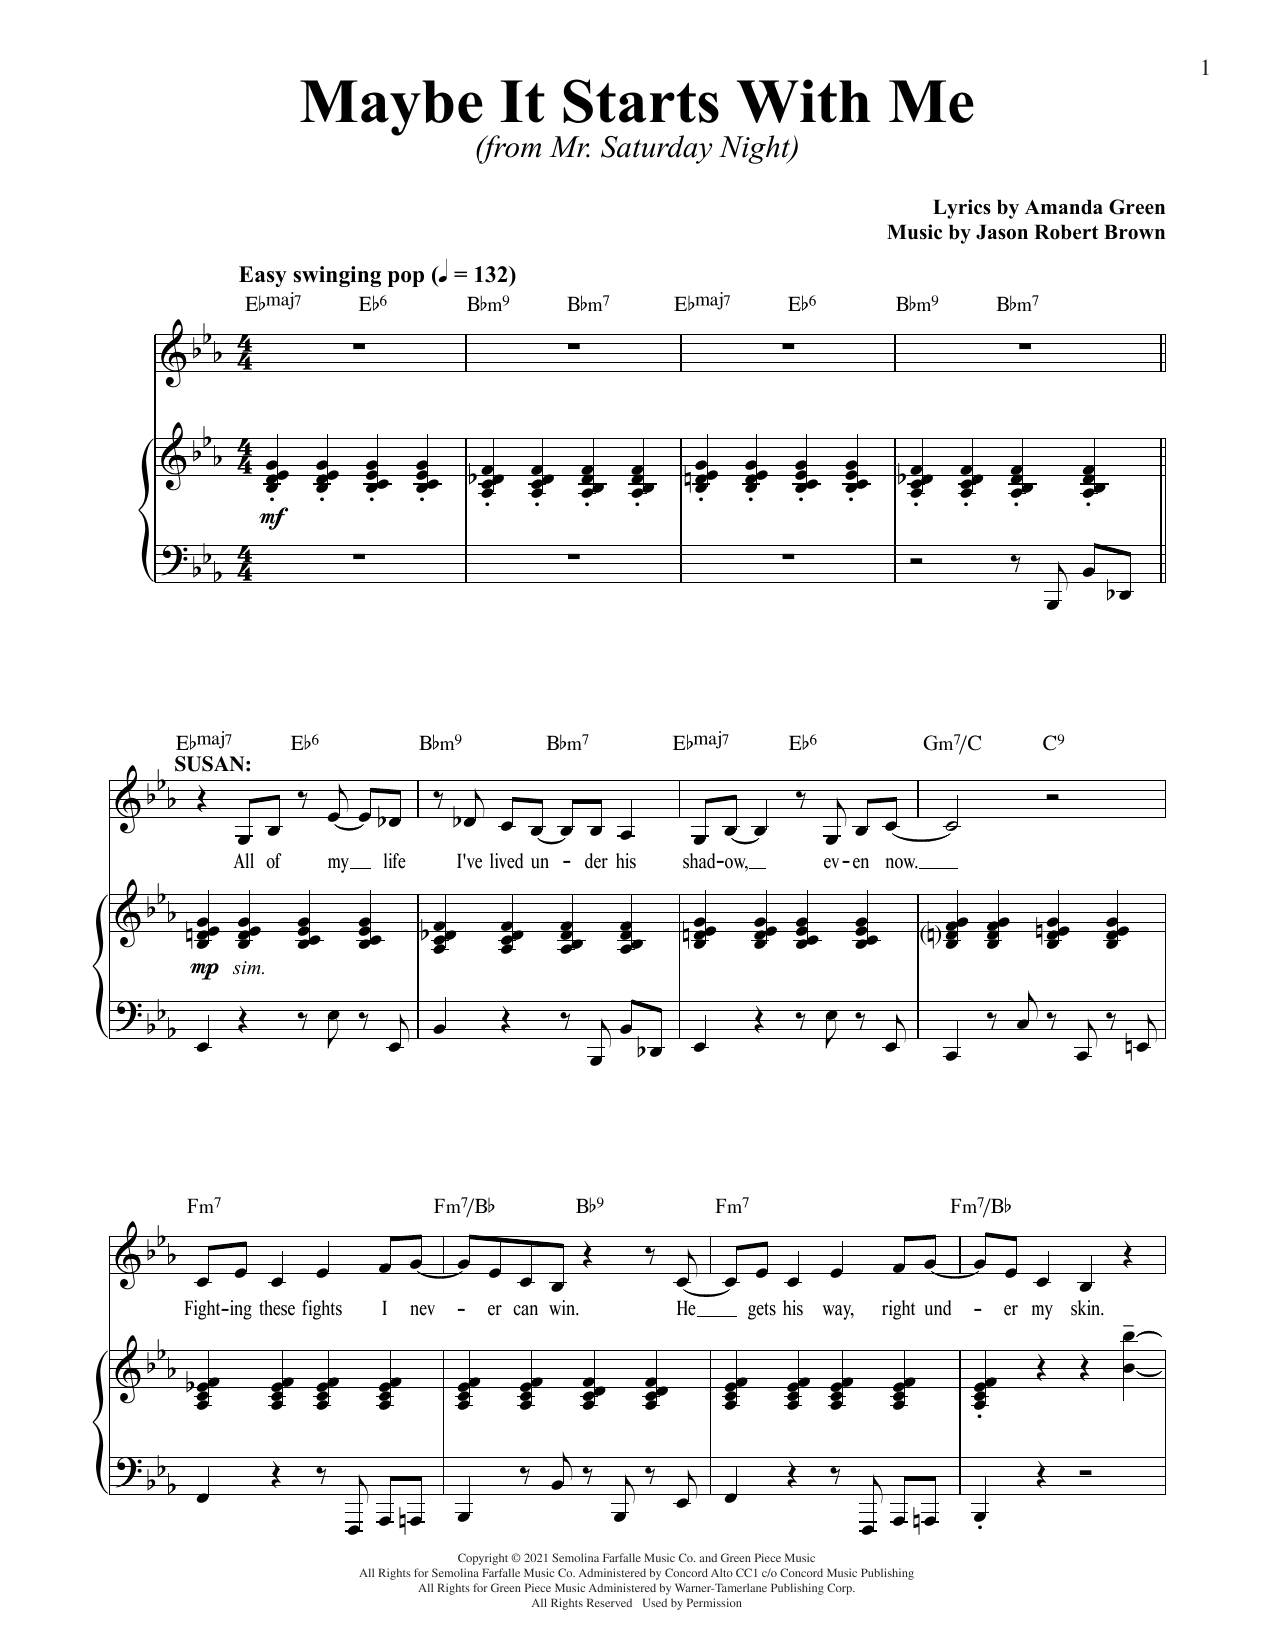 Jason Robert Brown and Amanda Green Maybe It Starts With Me (from Mr. Saturday Night) sheet music notes printable PDF score